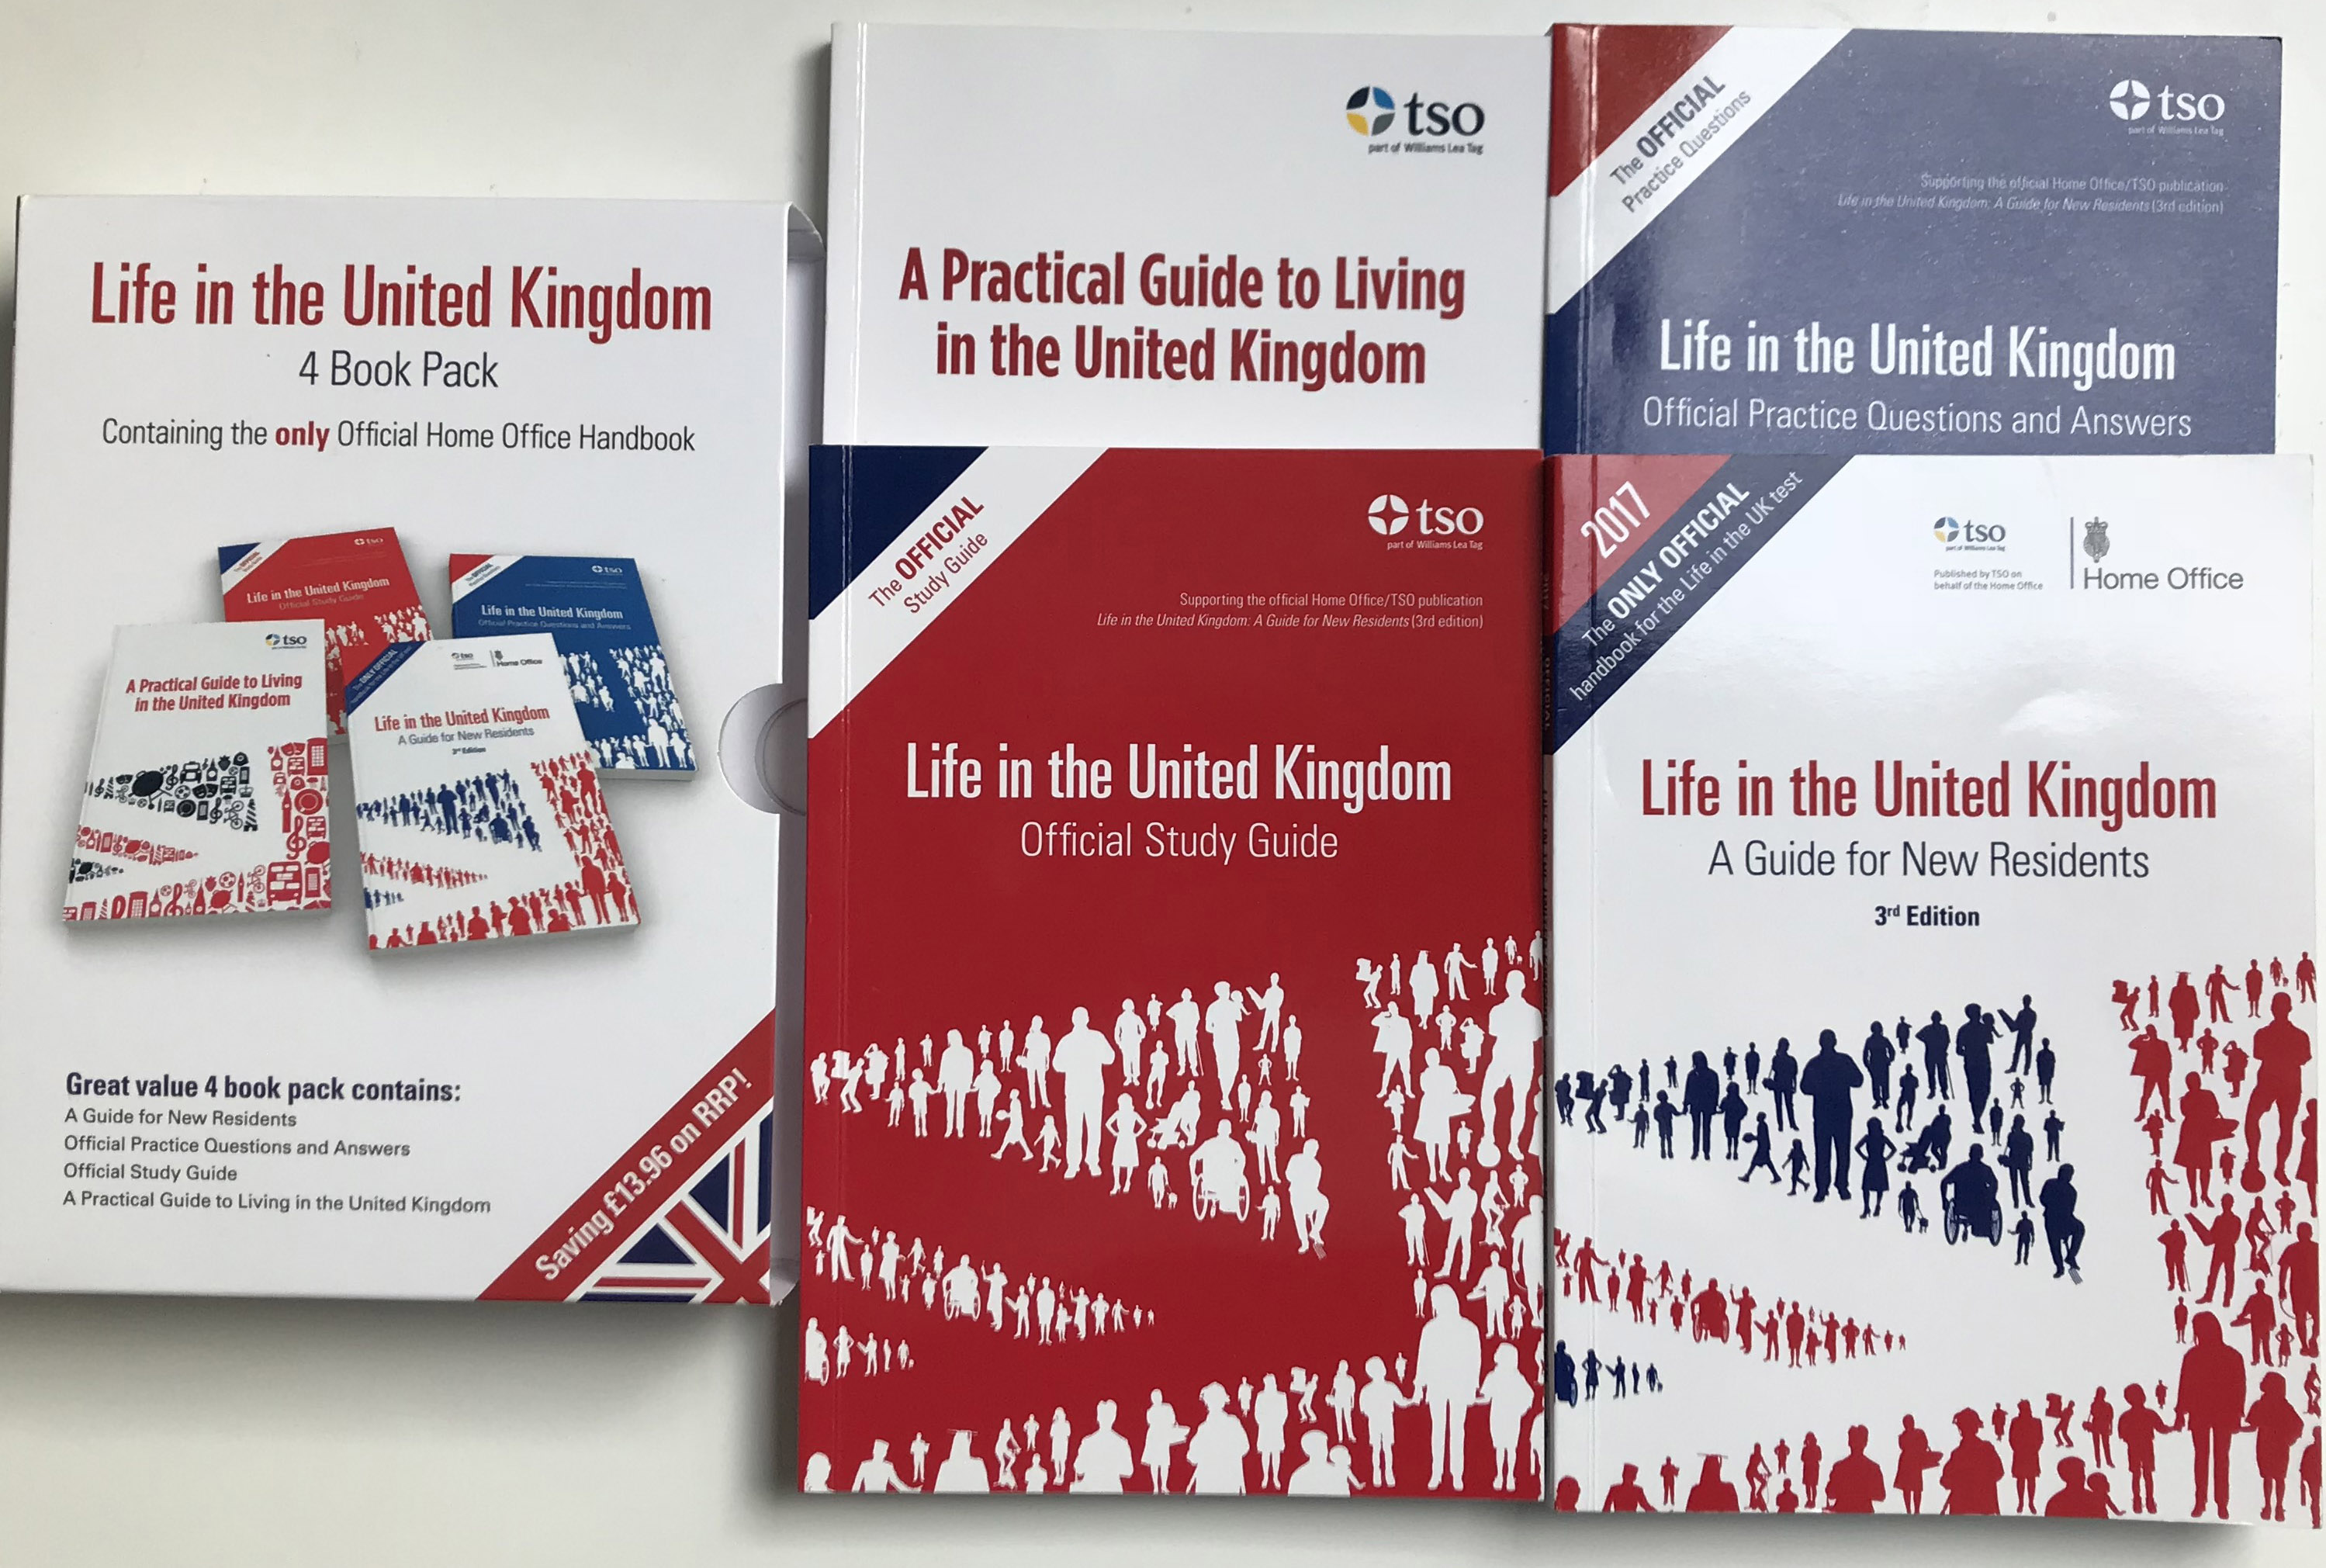 Life In The UK 4 Book Pack – Only for £19.99 with FREE Delivery – ISBN 9780113413959